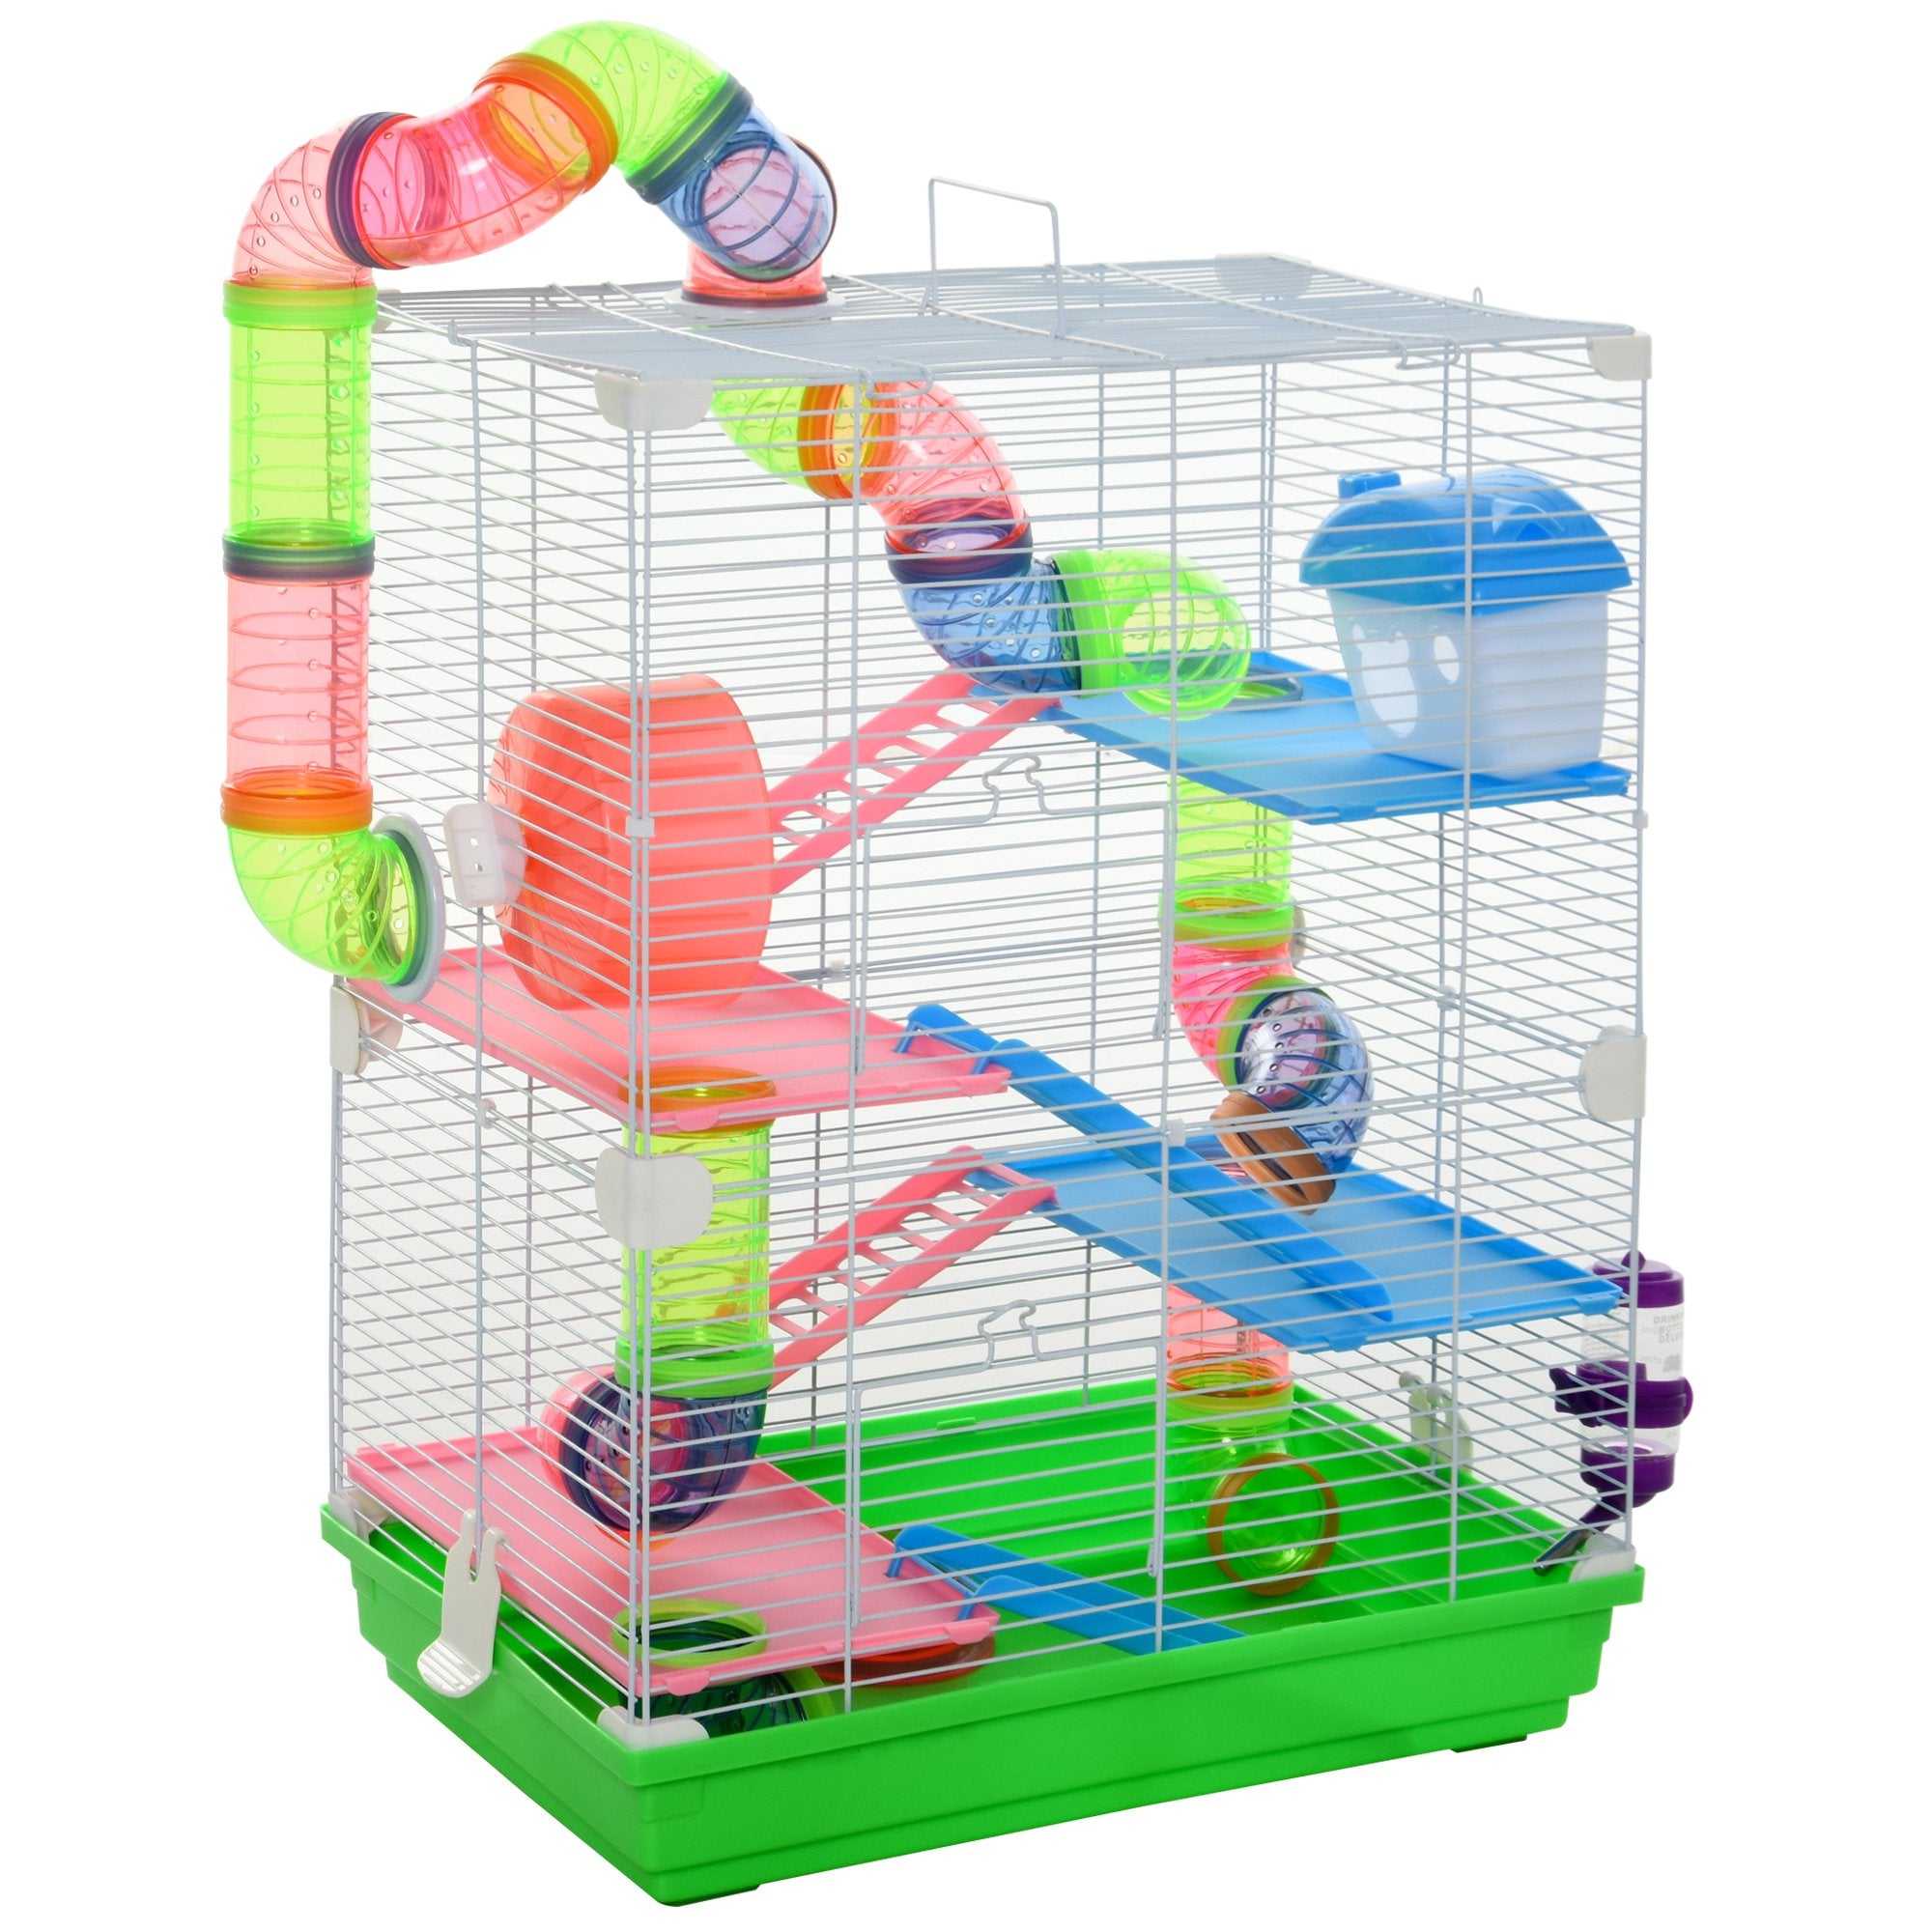 5 Tier Hamster Cage Carrier Habitat Small Animal House w/ Exercise Wheels Tunnel